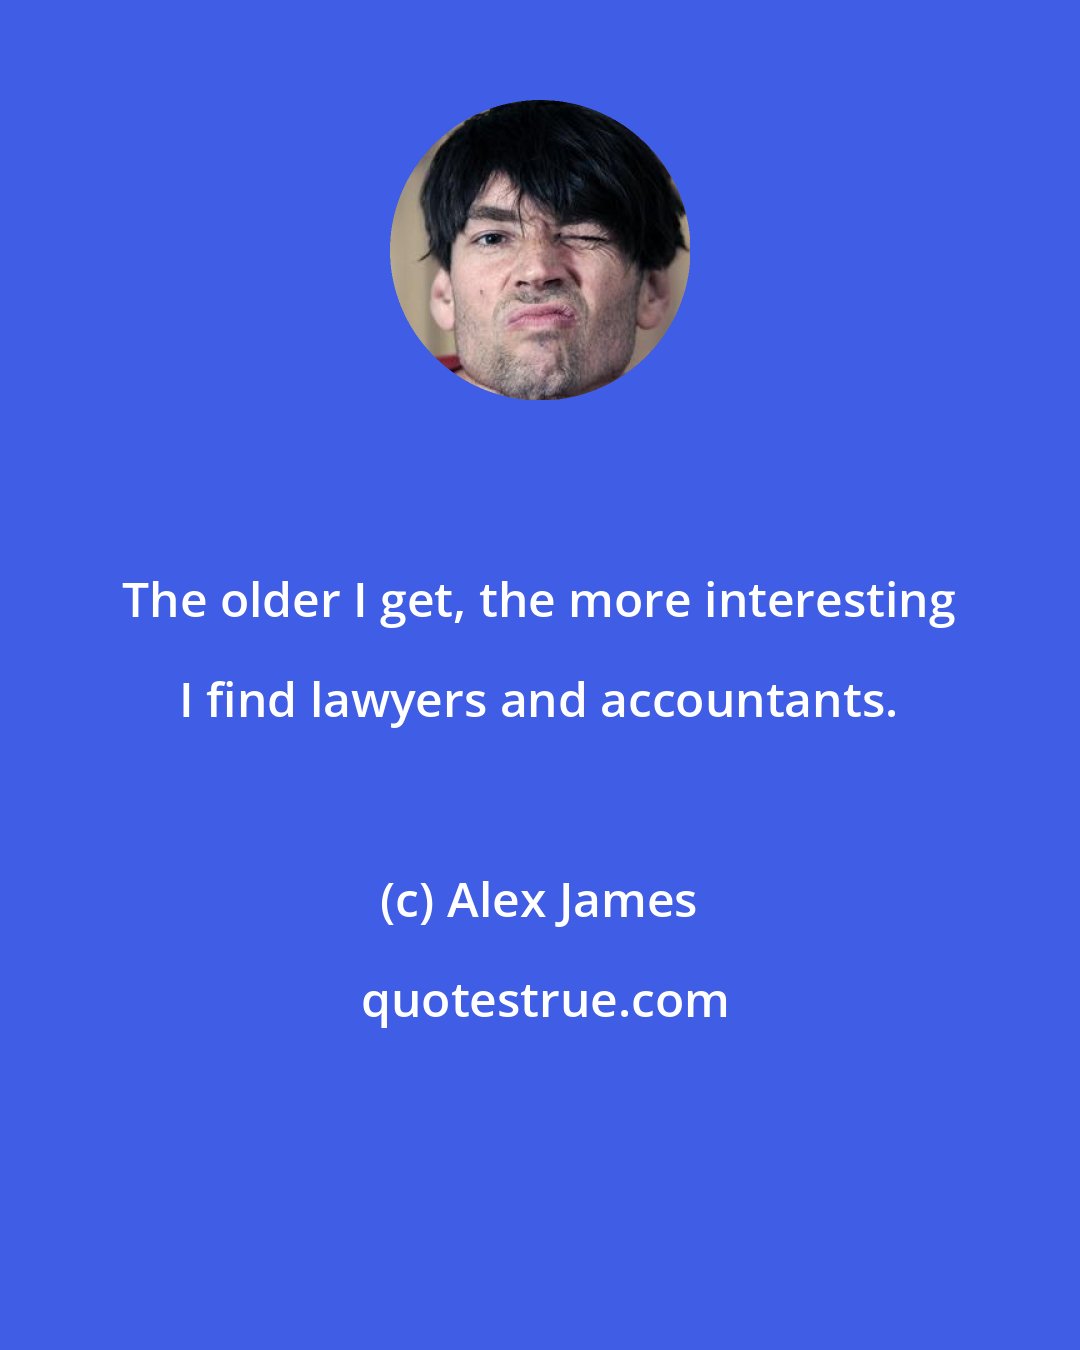 Alex James: The older I get, the more interesting I find lawyers and accountants.